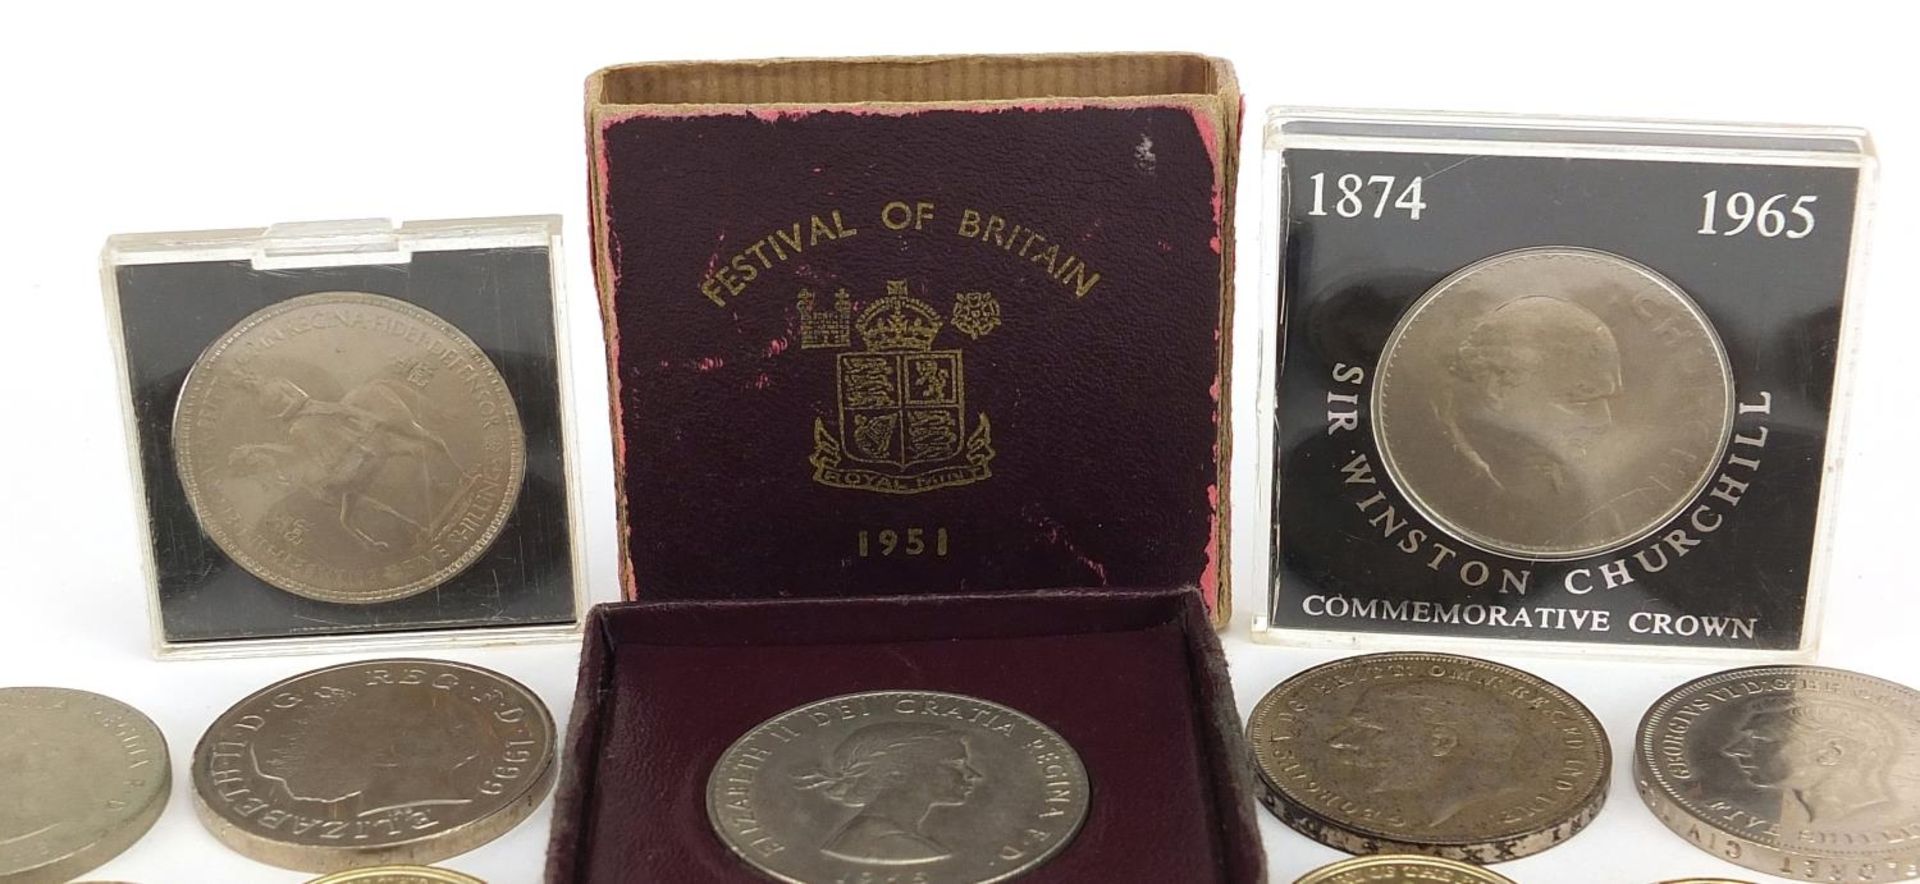 British coinage including 1935 Rocking Horse crown, five pound, two pound and one pound coins - Image 2 of 4